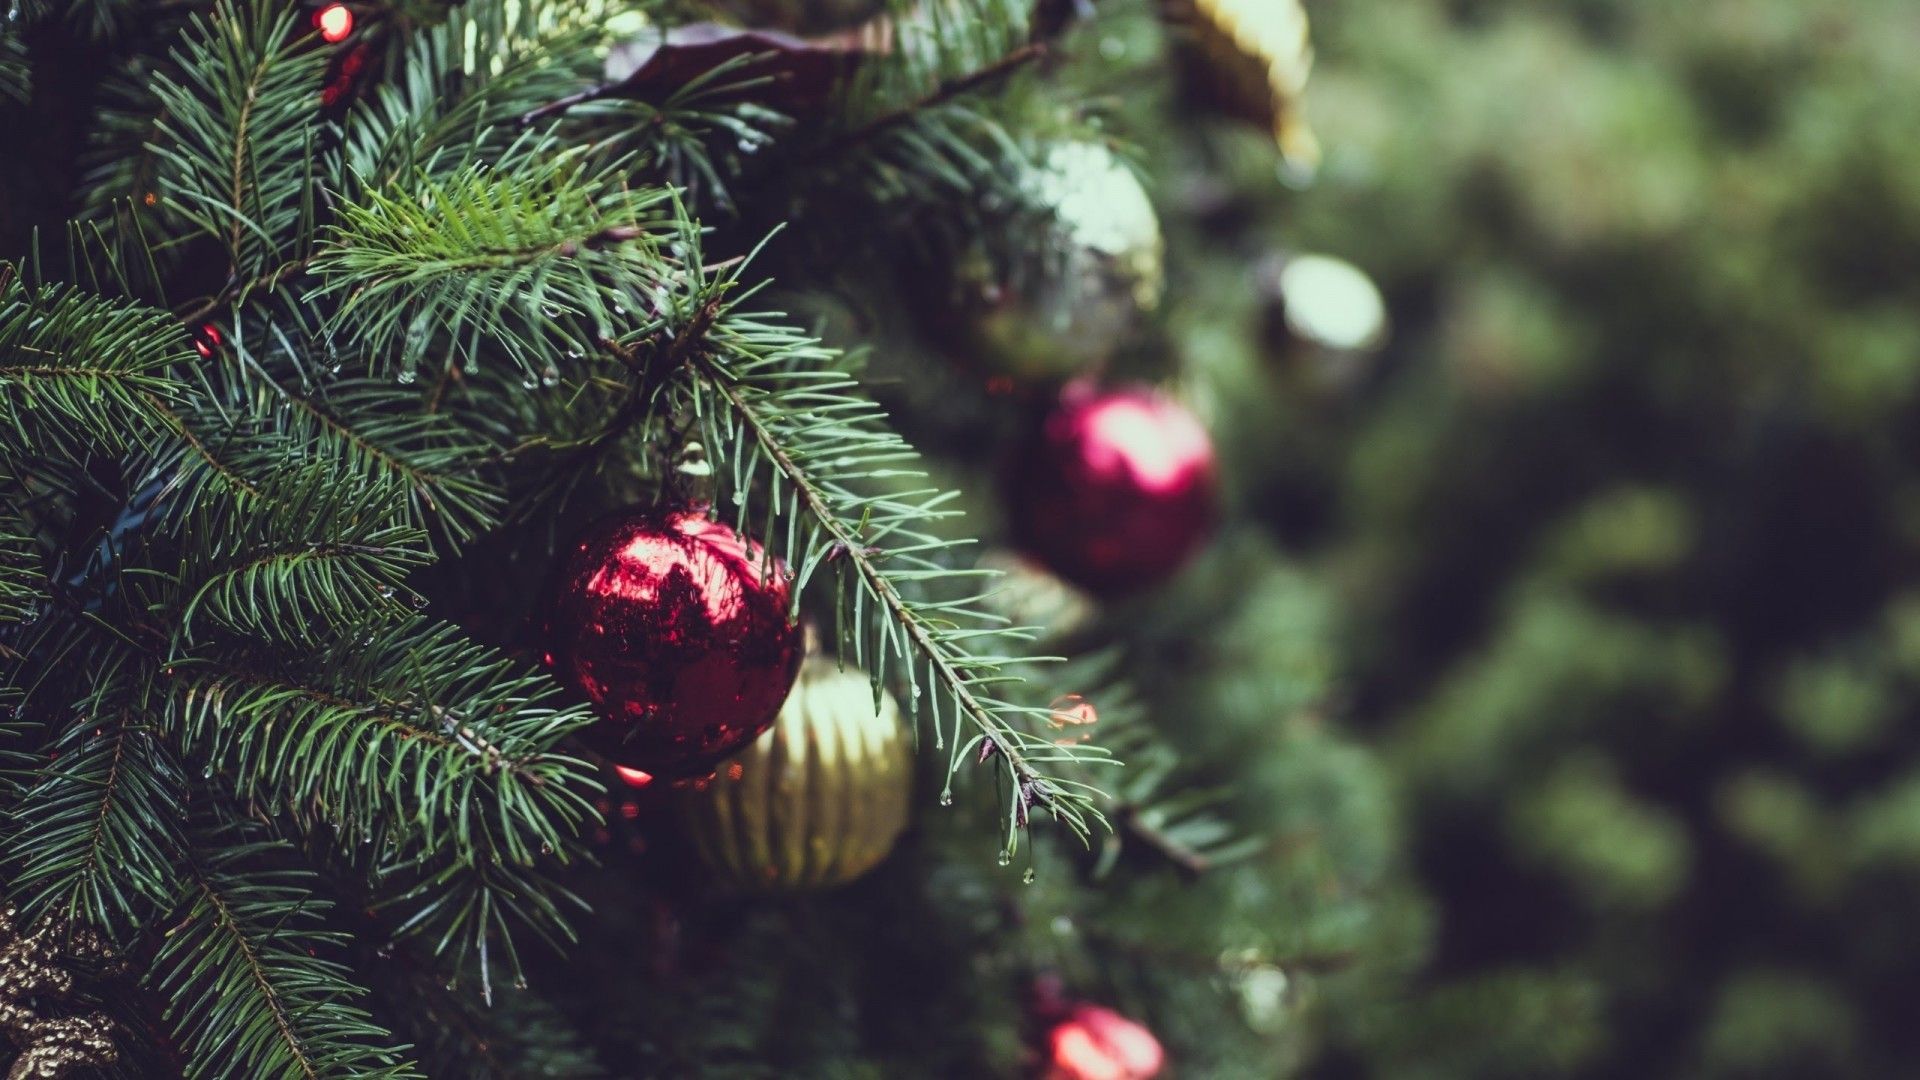 Download 1920x1080 Christmas Tree, Ornaments, Close Up, Blurred Wallpaper For Widescreen